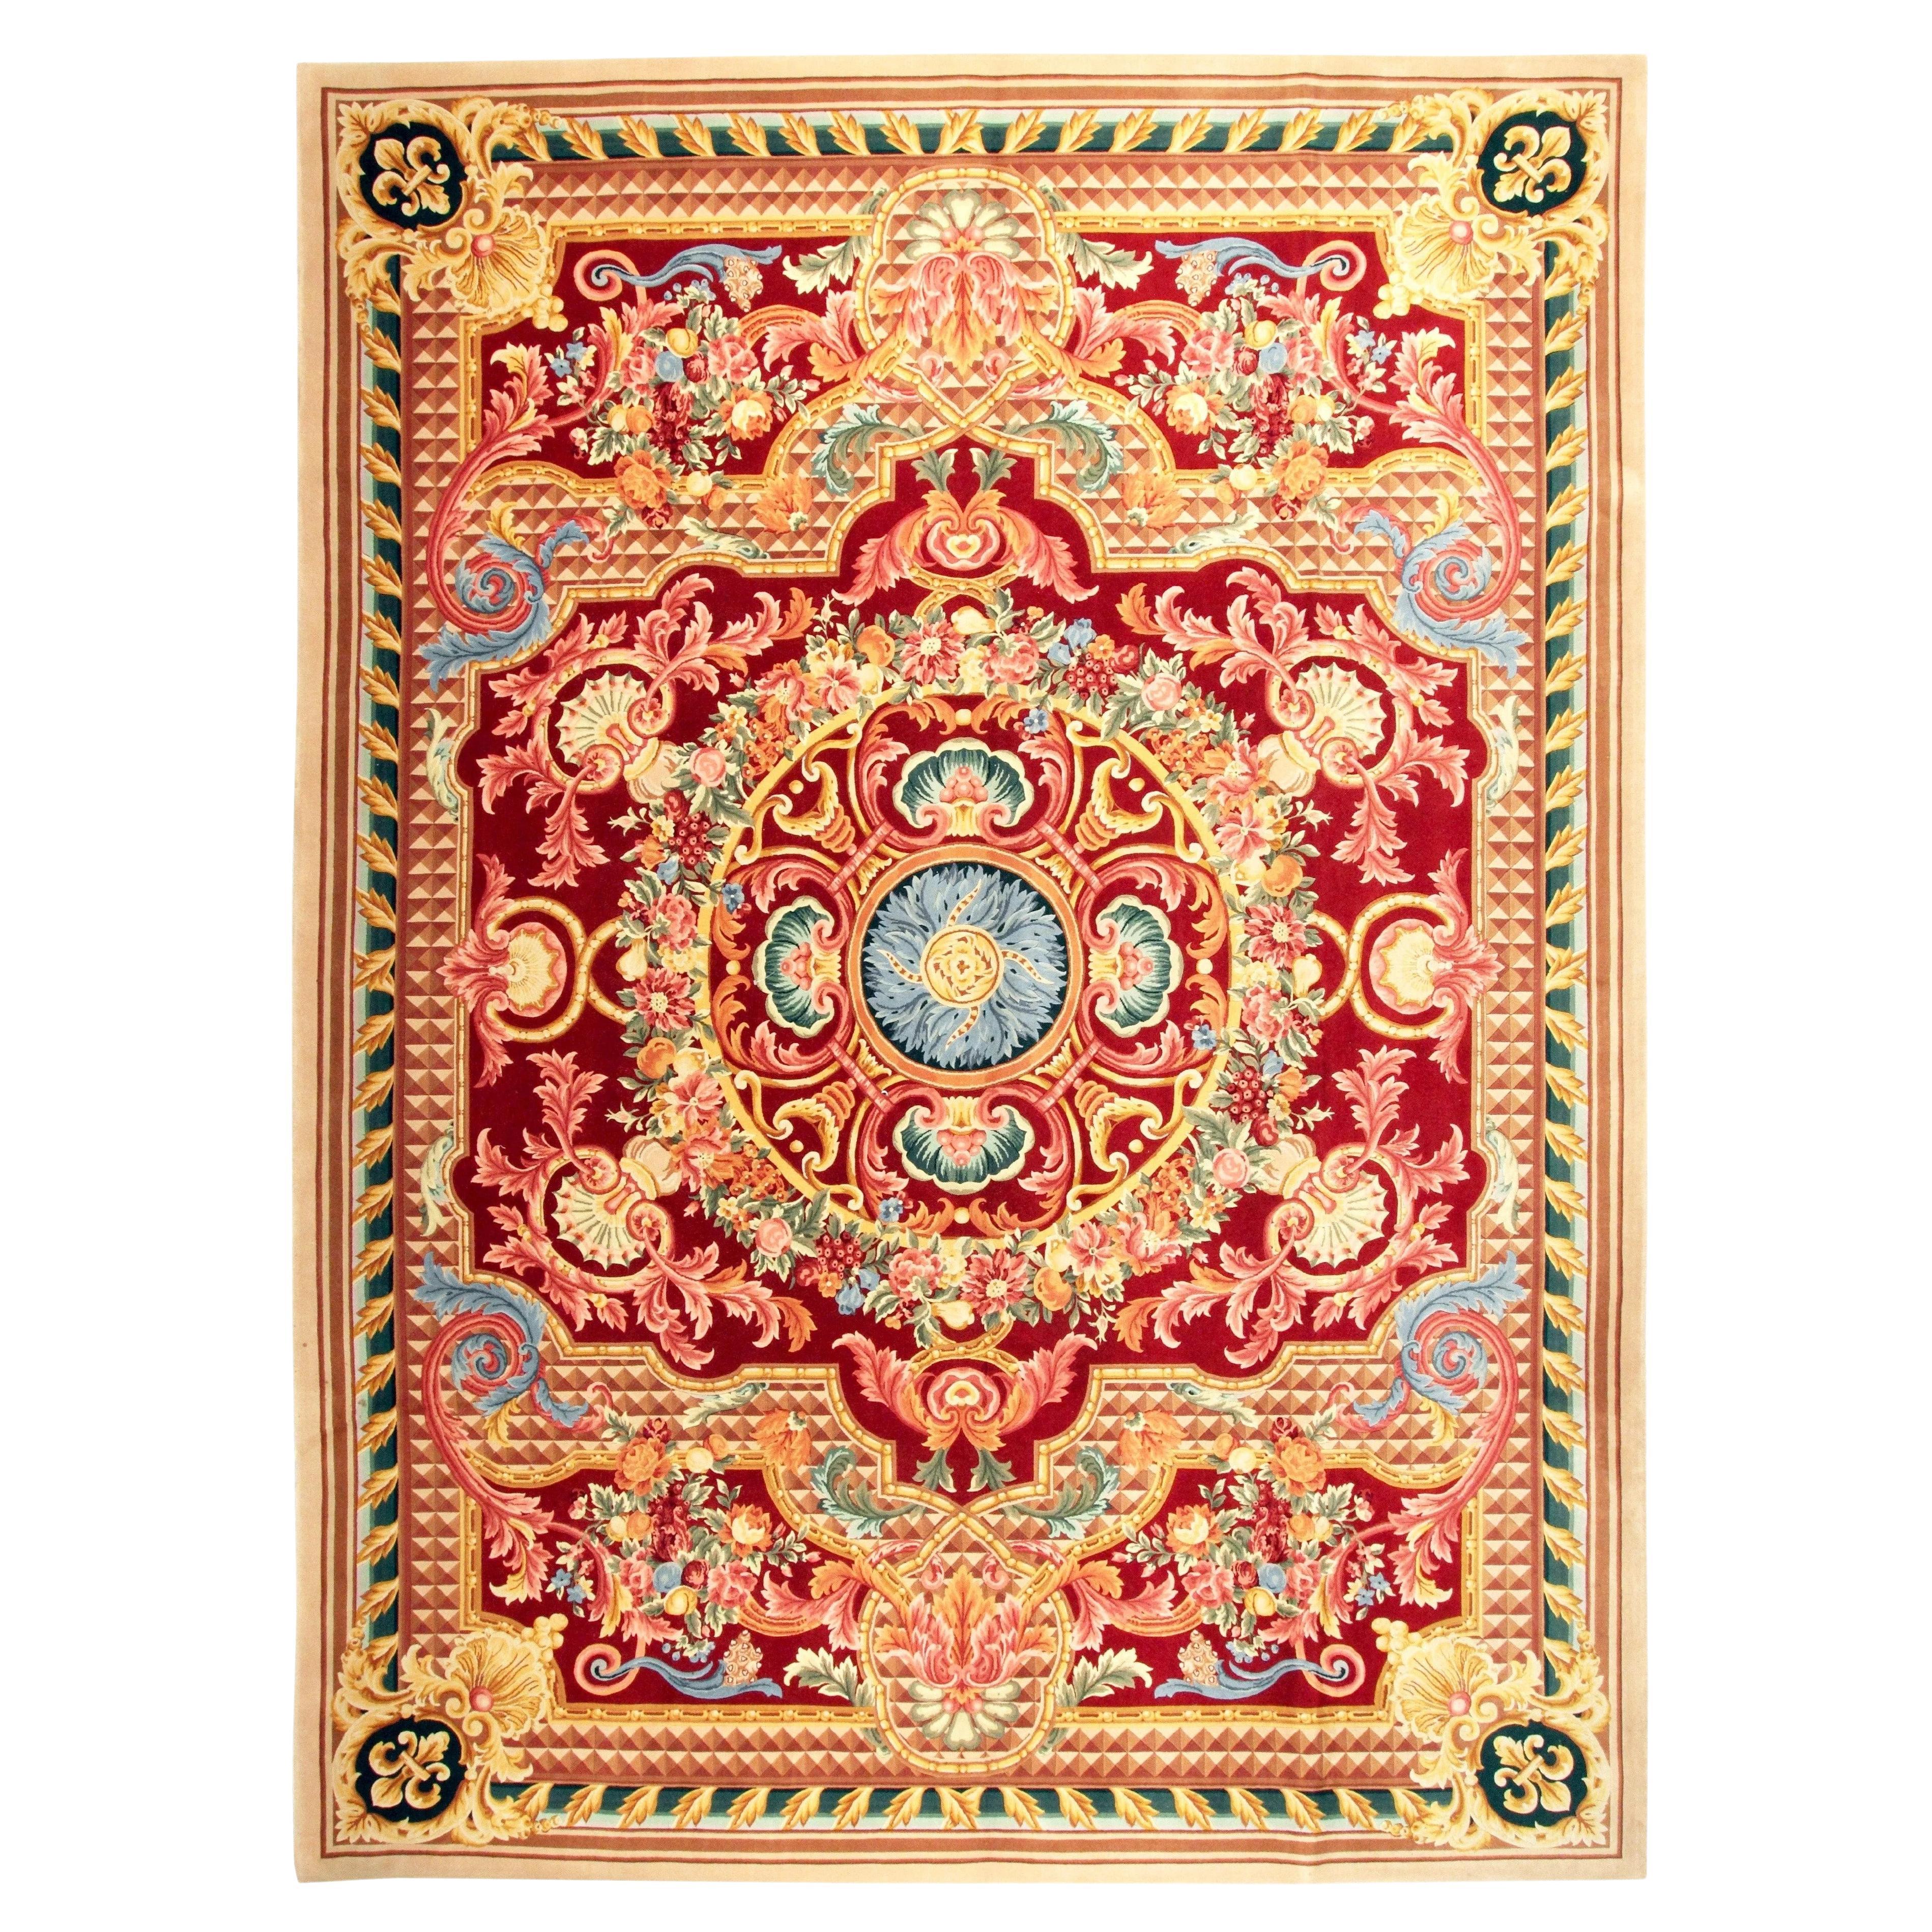 VIA COMO  'Royal Palace Red' 10x13 Rug Hand Knotted Carpet Wool and Silk RARE